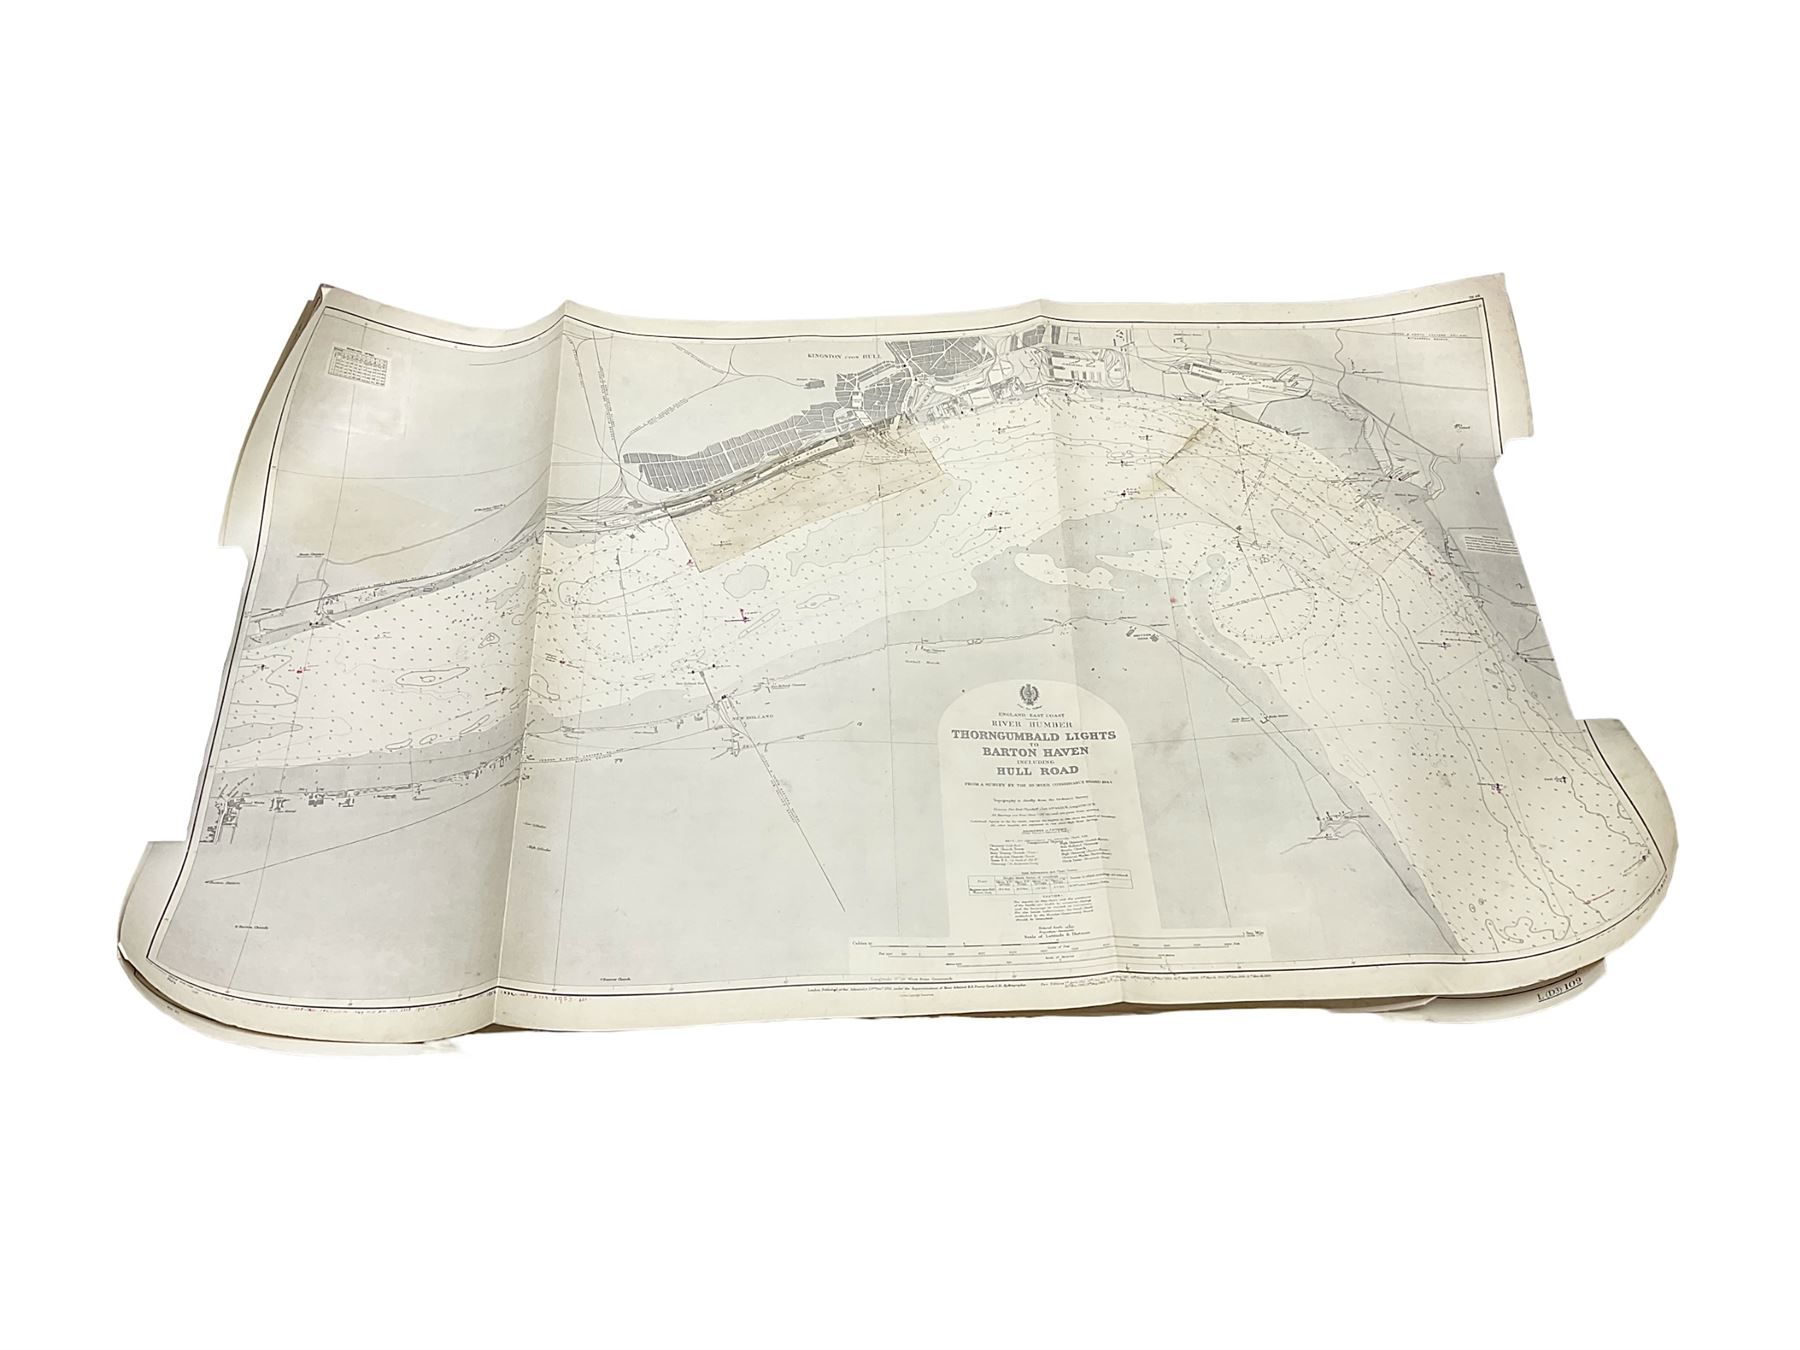 Four shipping charts depicting the River Humber